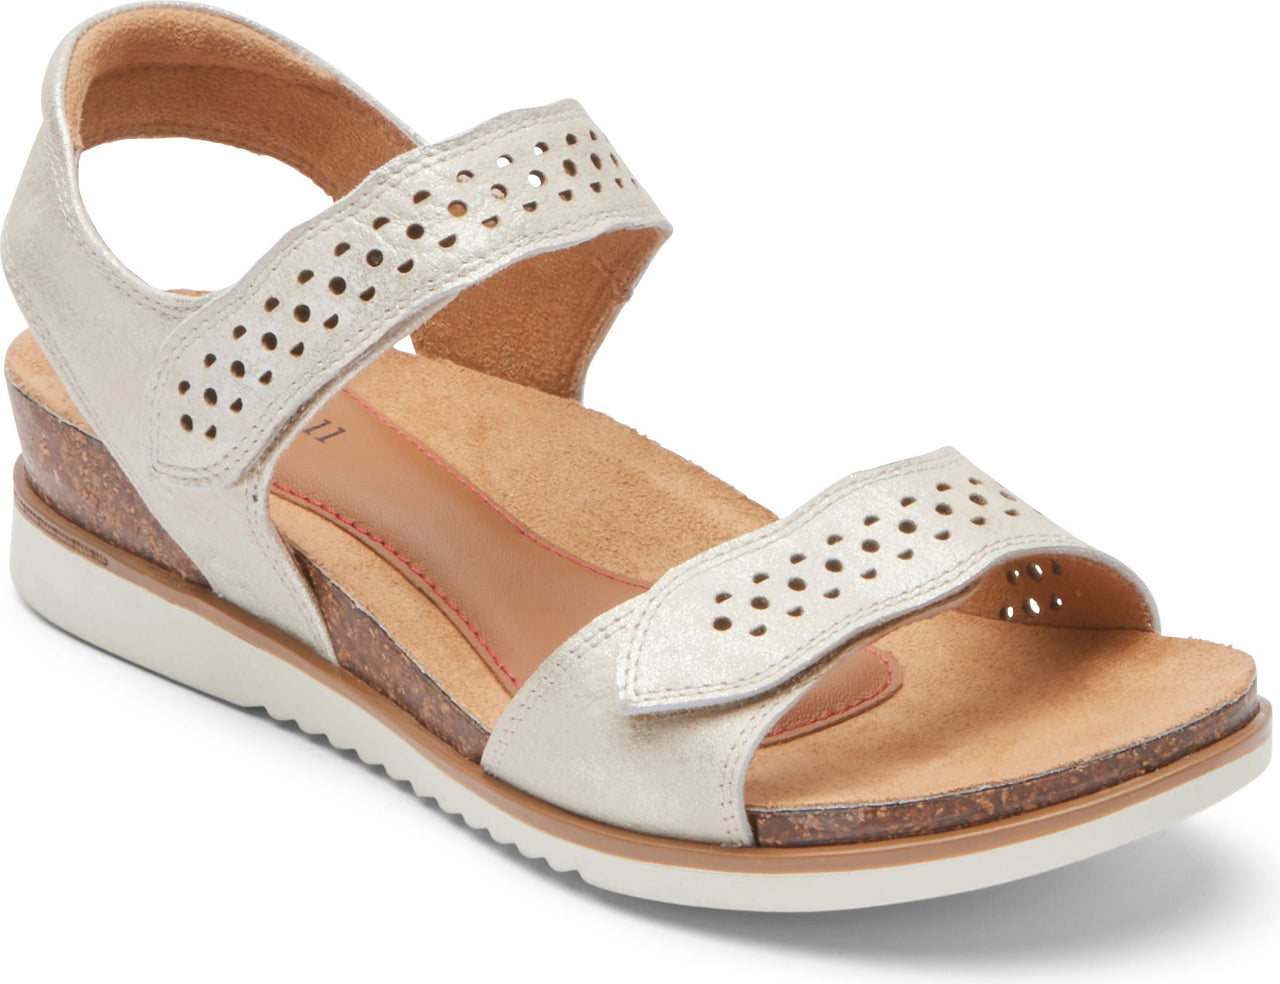 Cobb Hill Sandals May Wave Strap White Metallic